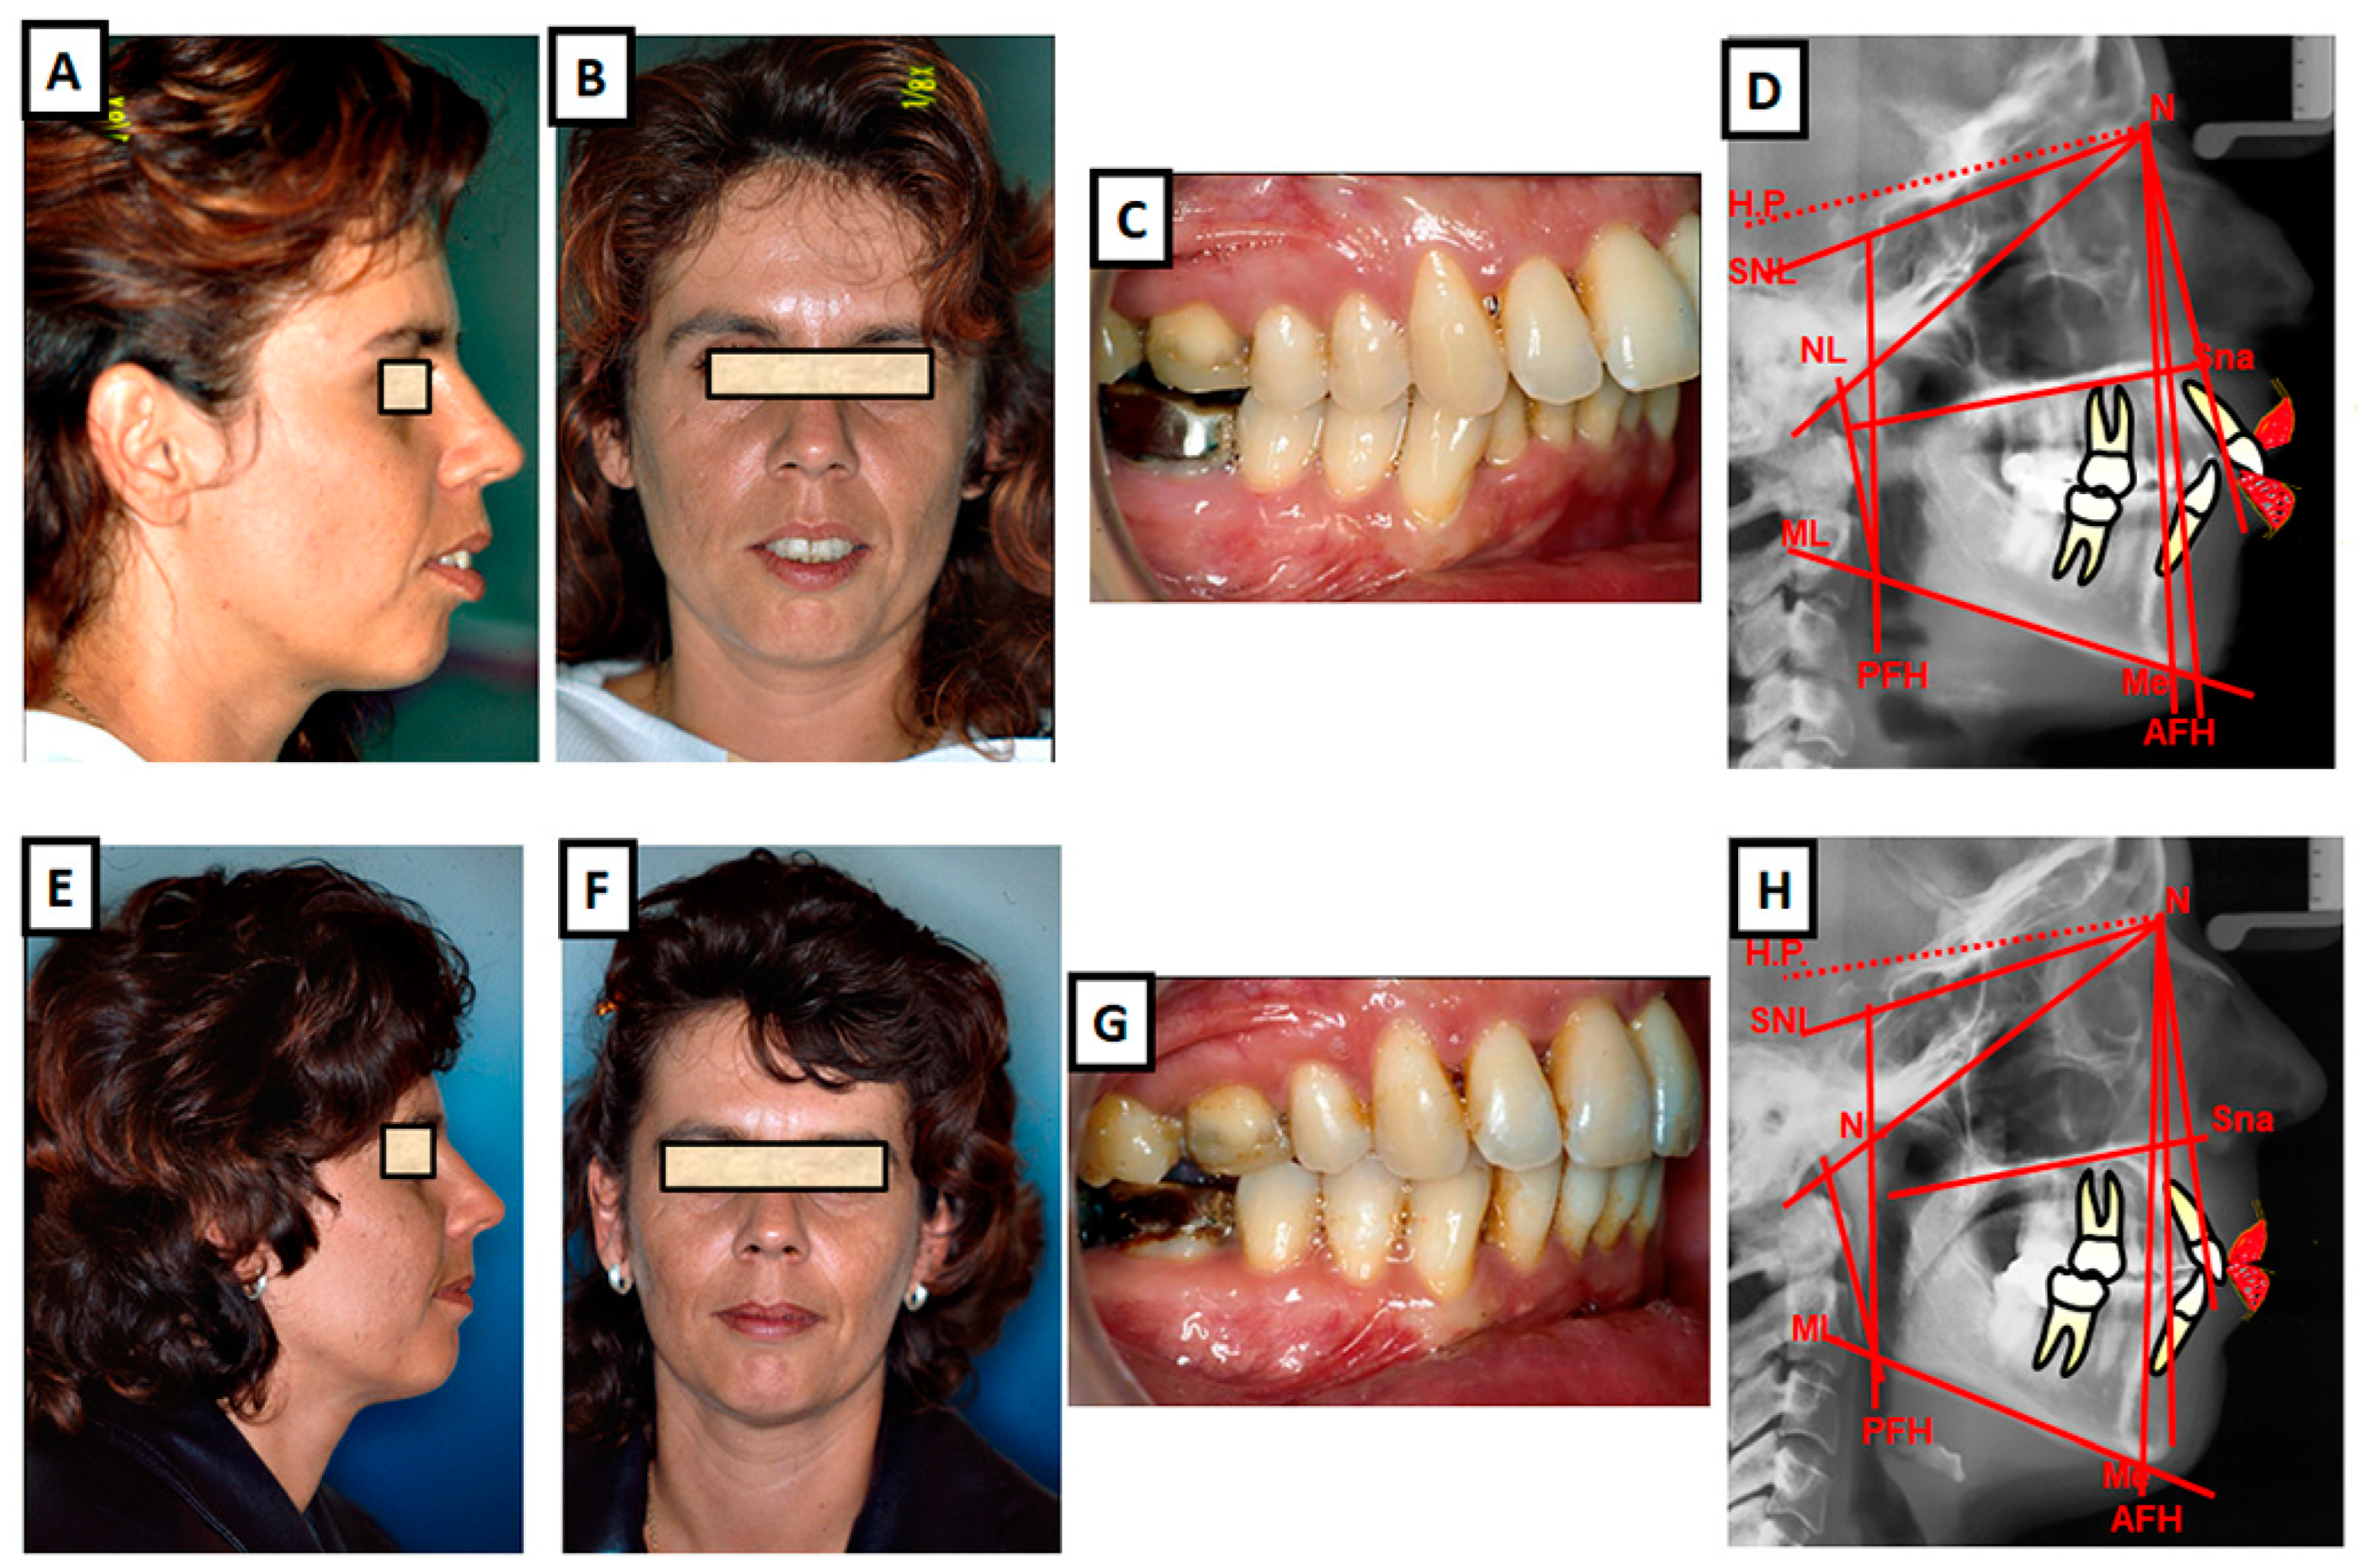 Adult patient with Class II, Div. 2 malocclusion and collapse of